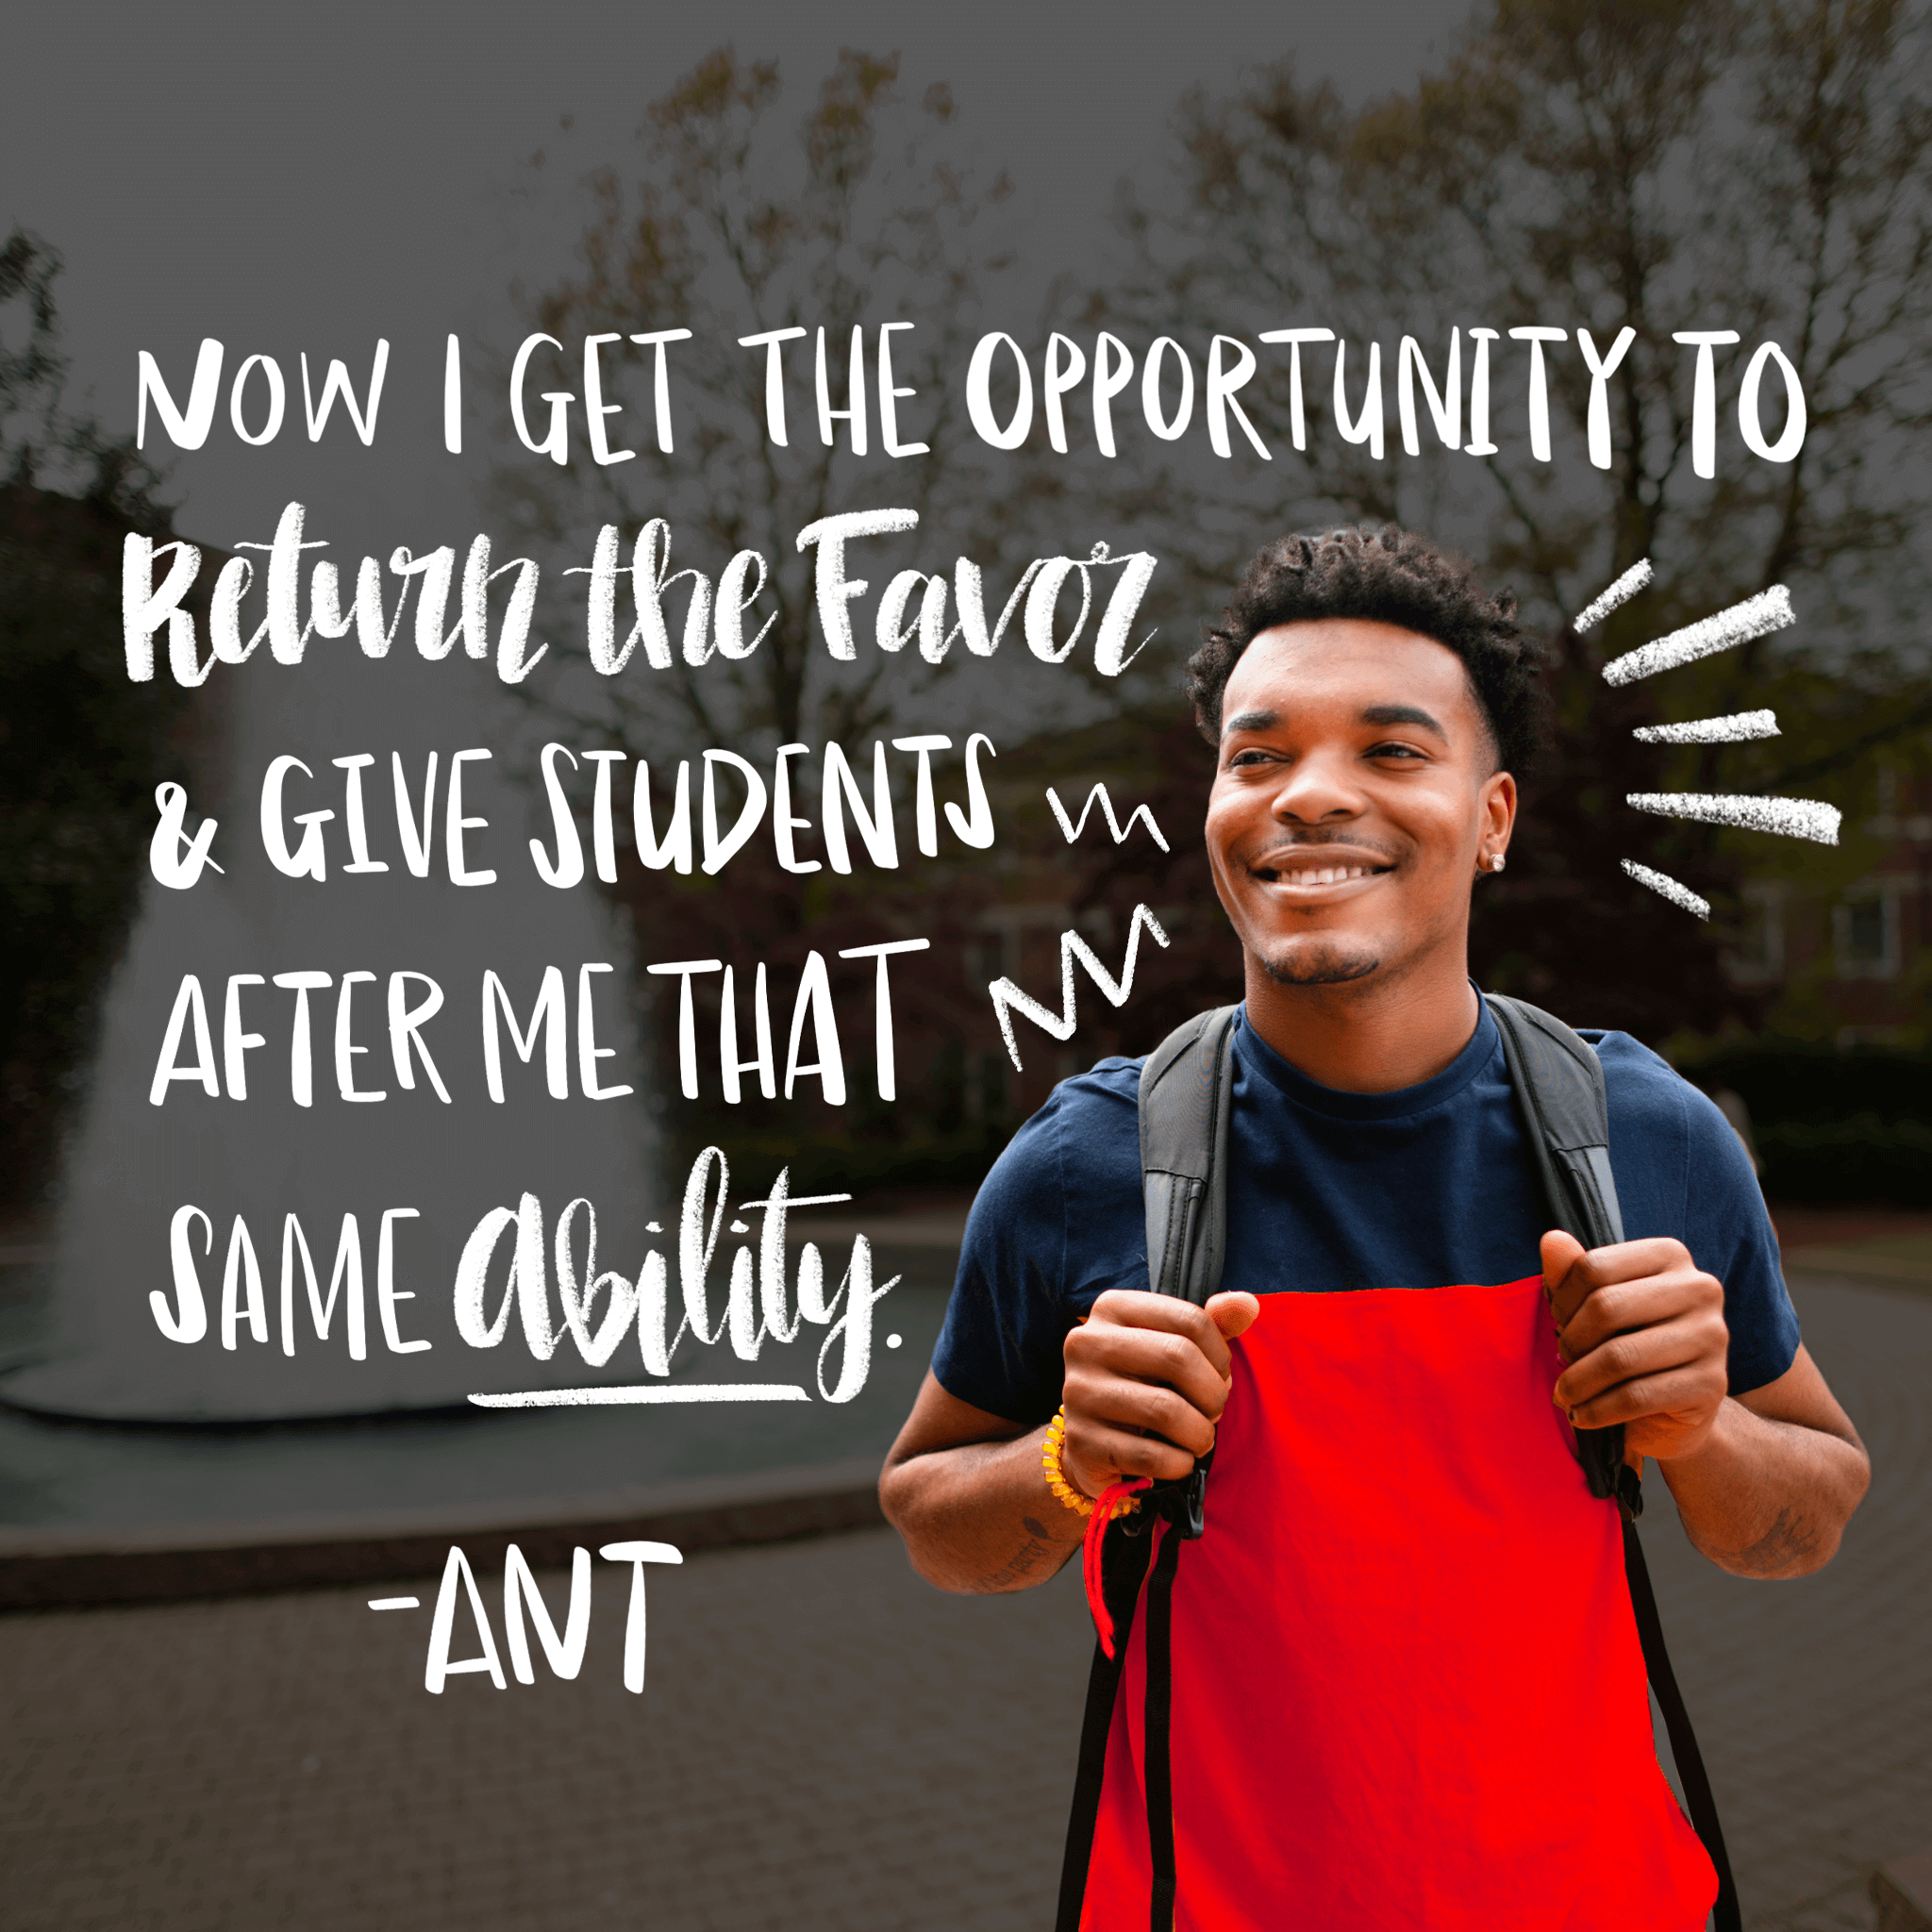 Now I get the opportunity to return the favor & give students after me that same ability - Ant